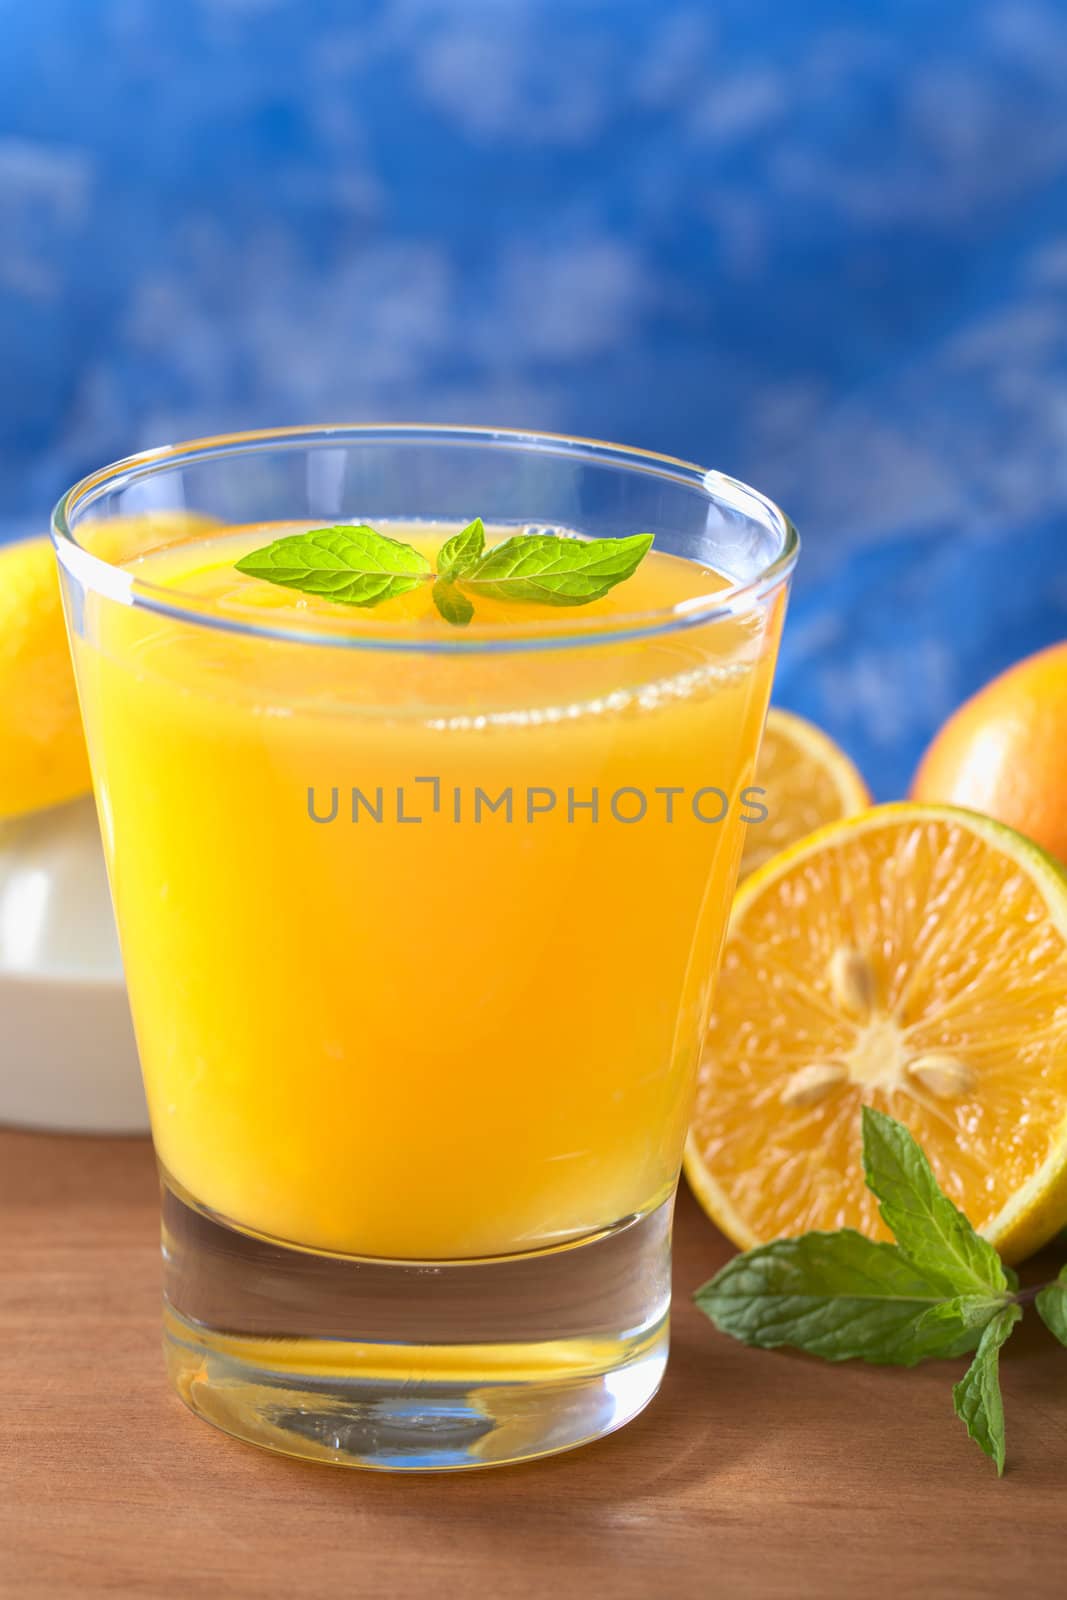 Freshly squeezed orange juice with orange slice and mint leaf on top of the juice with a blue background (Selective Focus, Focus on the mint leaf on top of the juice)